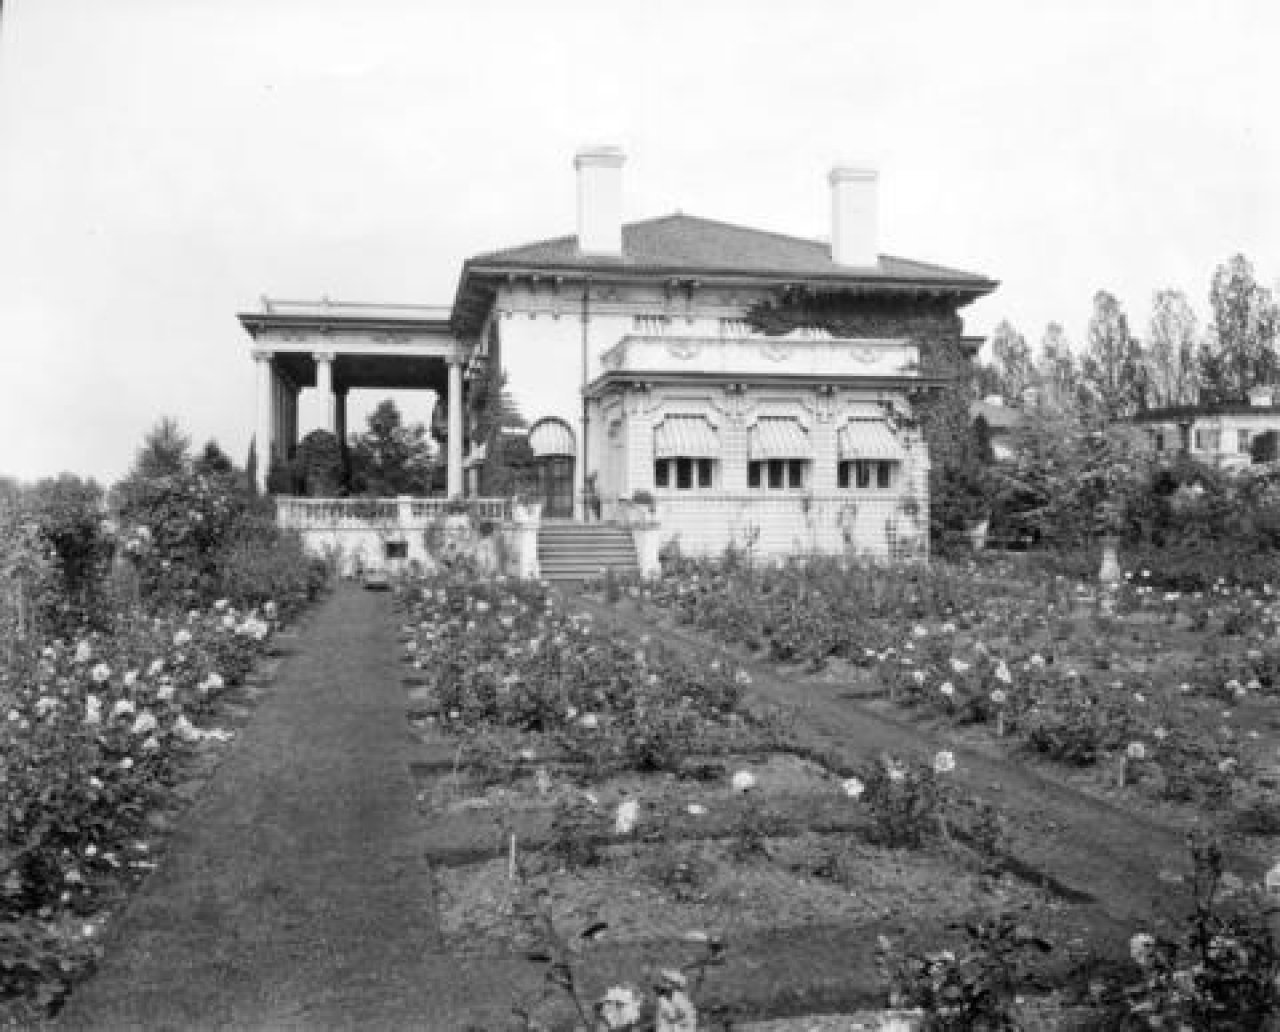 Hycroft Rose Garden 1922
Source: City of Vancouver Archives Item : Bu P567 - [The rose garden at the A.D. McRae residence (